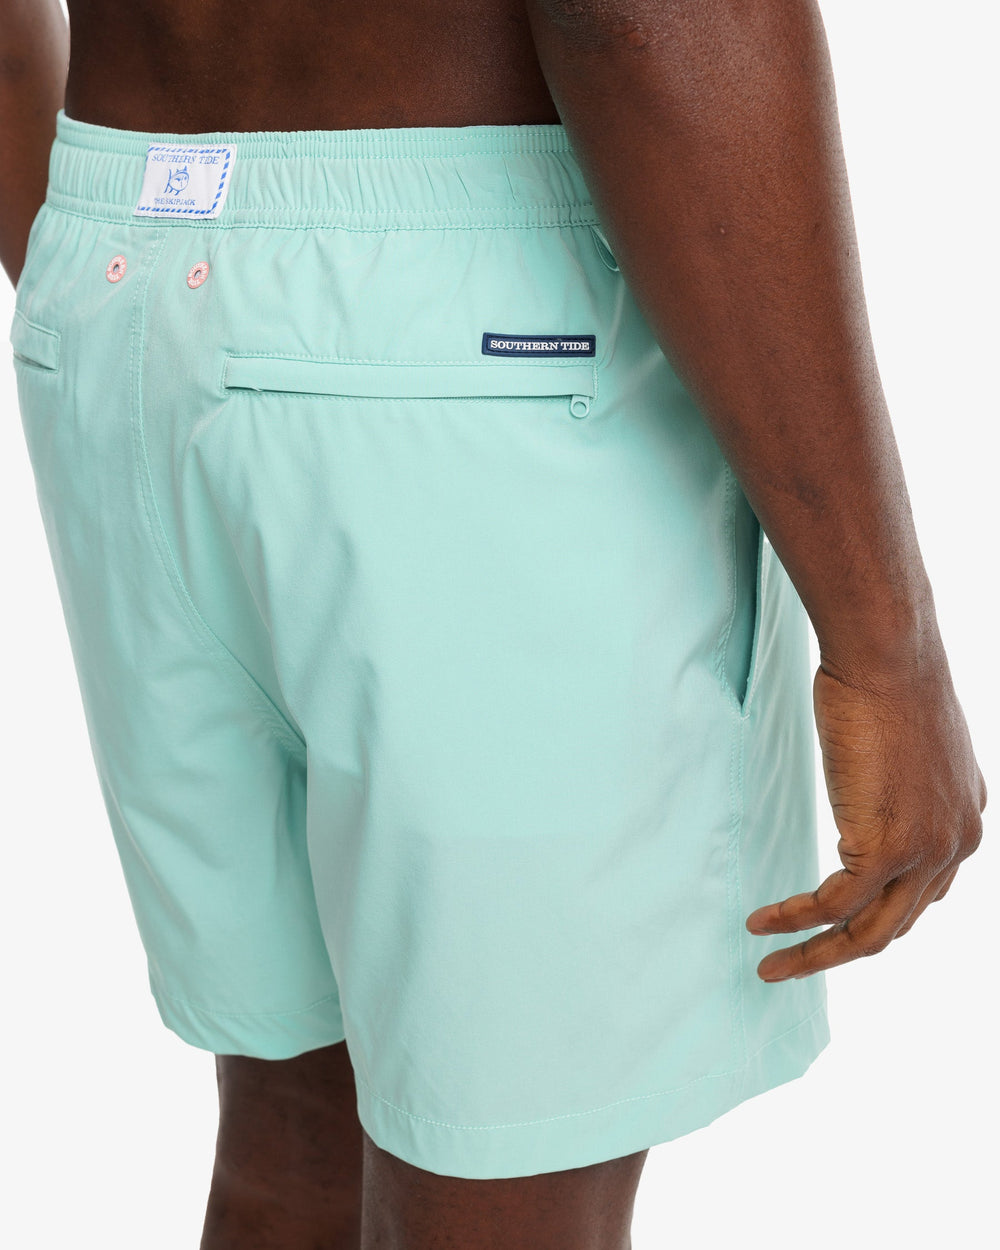 The model detail view of the Men's Solid Swim Trunk by Southern Tide - Isle of Pines